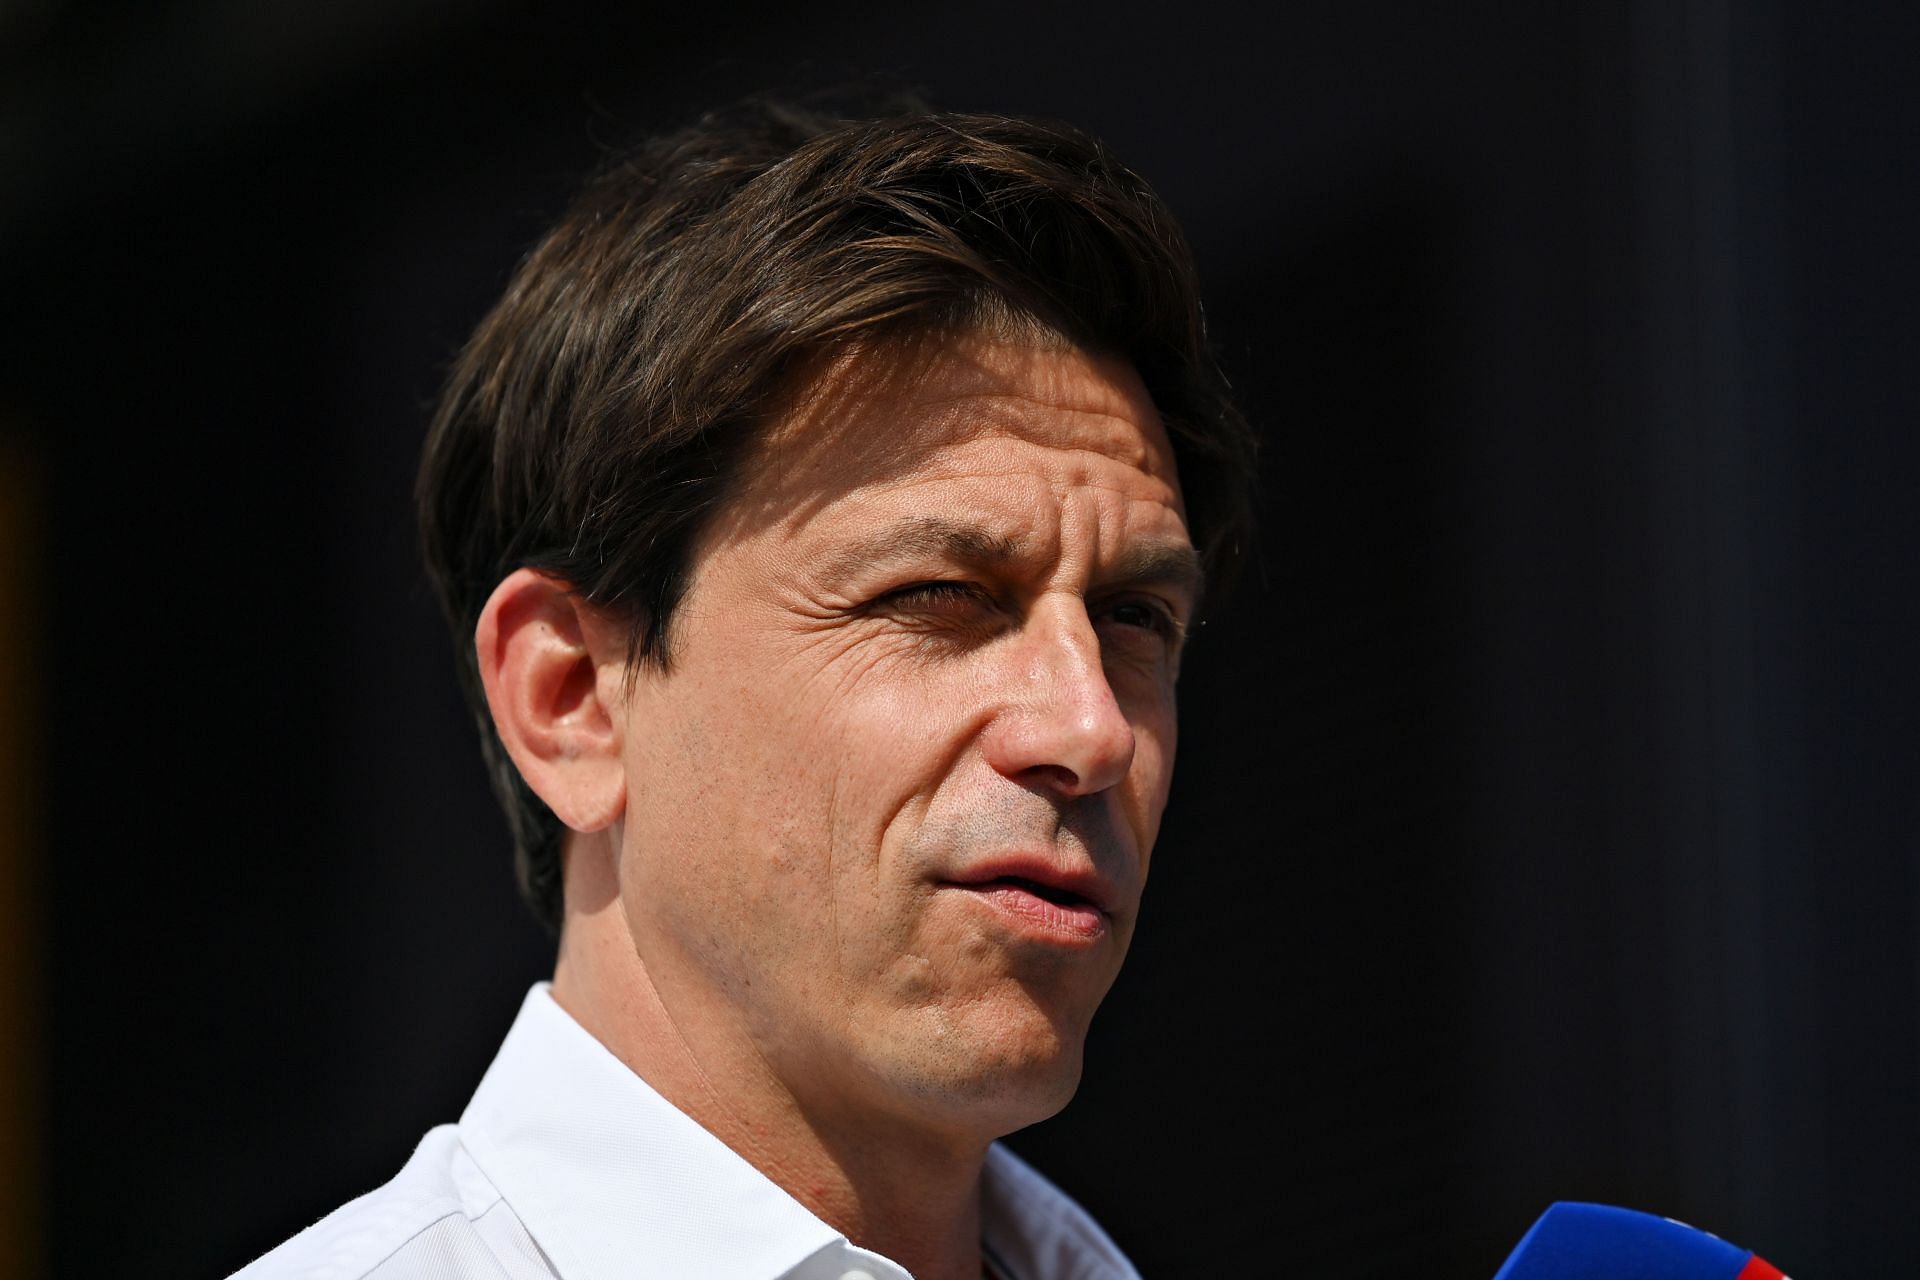 Toto Wolff talks to the media in the Paddock during practice in Zandvoort, Netherlands (Photo by Dan Mullan/Getty Images